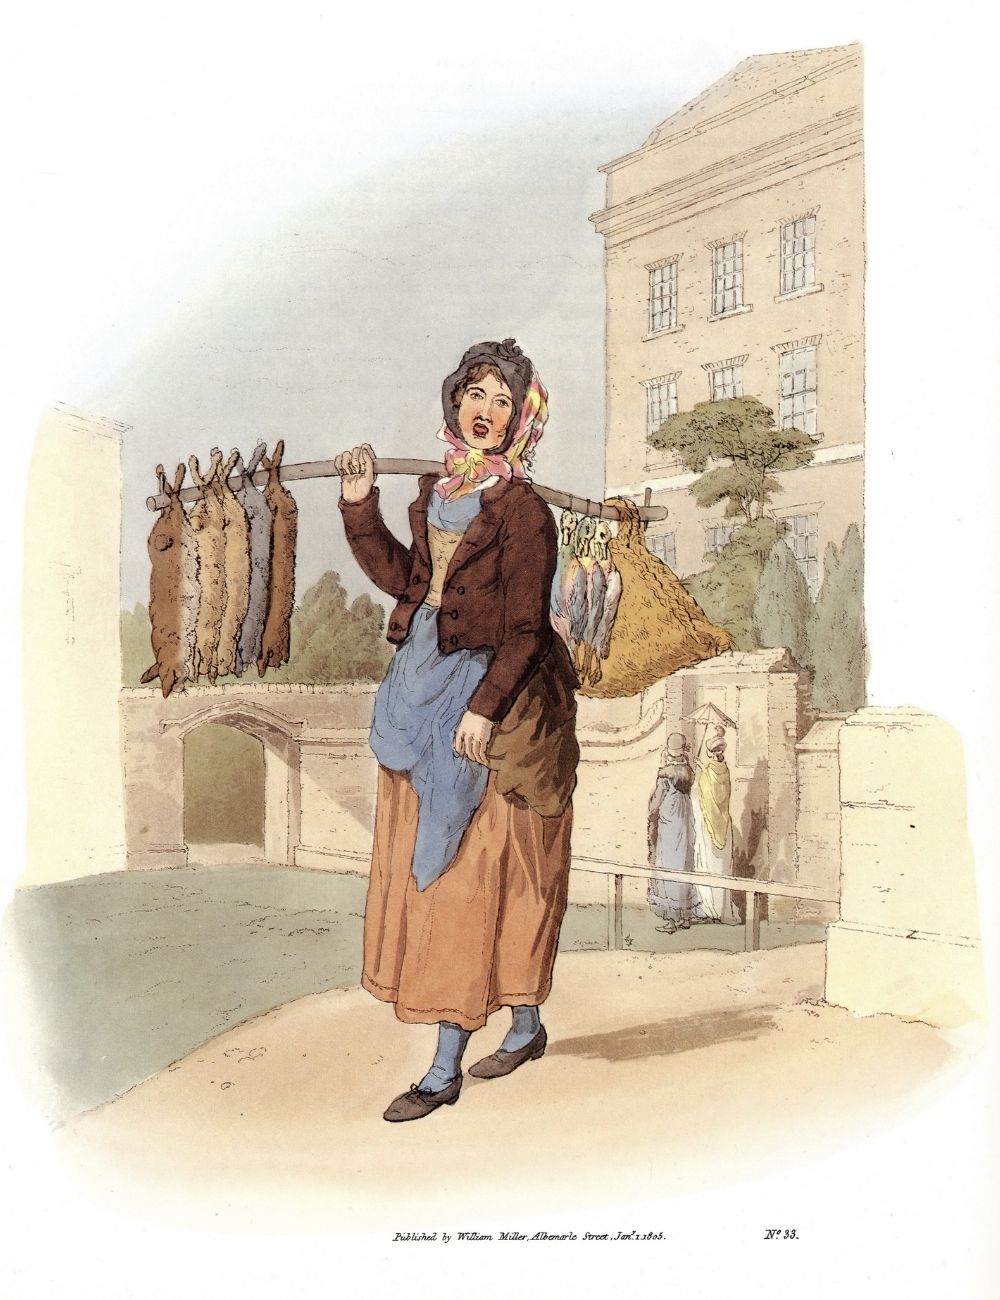 Book=plate showing a female rabbit seller. She is wearing 18th century clothing and is carrying rabbits and ducks on a stick over her shoulder.